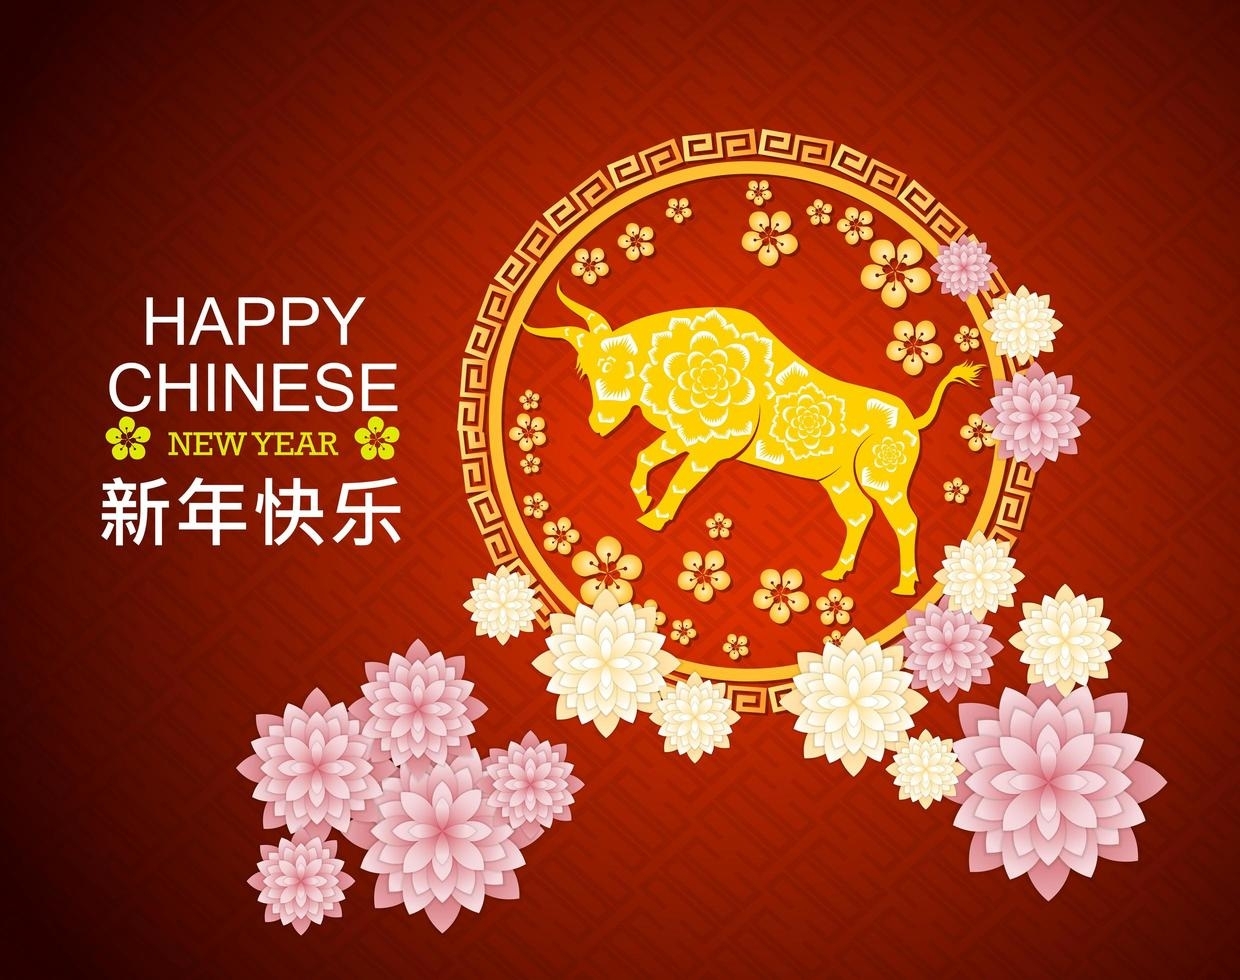 Happy Chinese New Year 2021 Red Greeting - Download Free